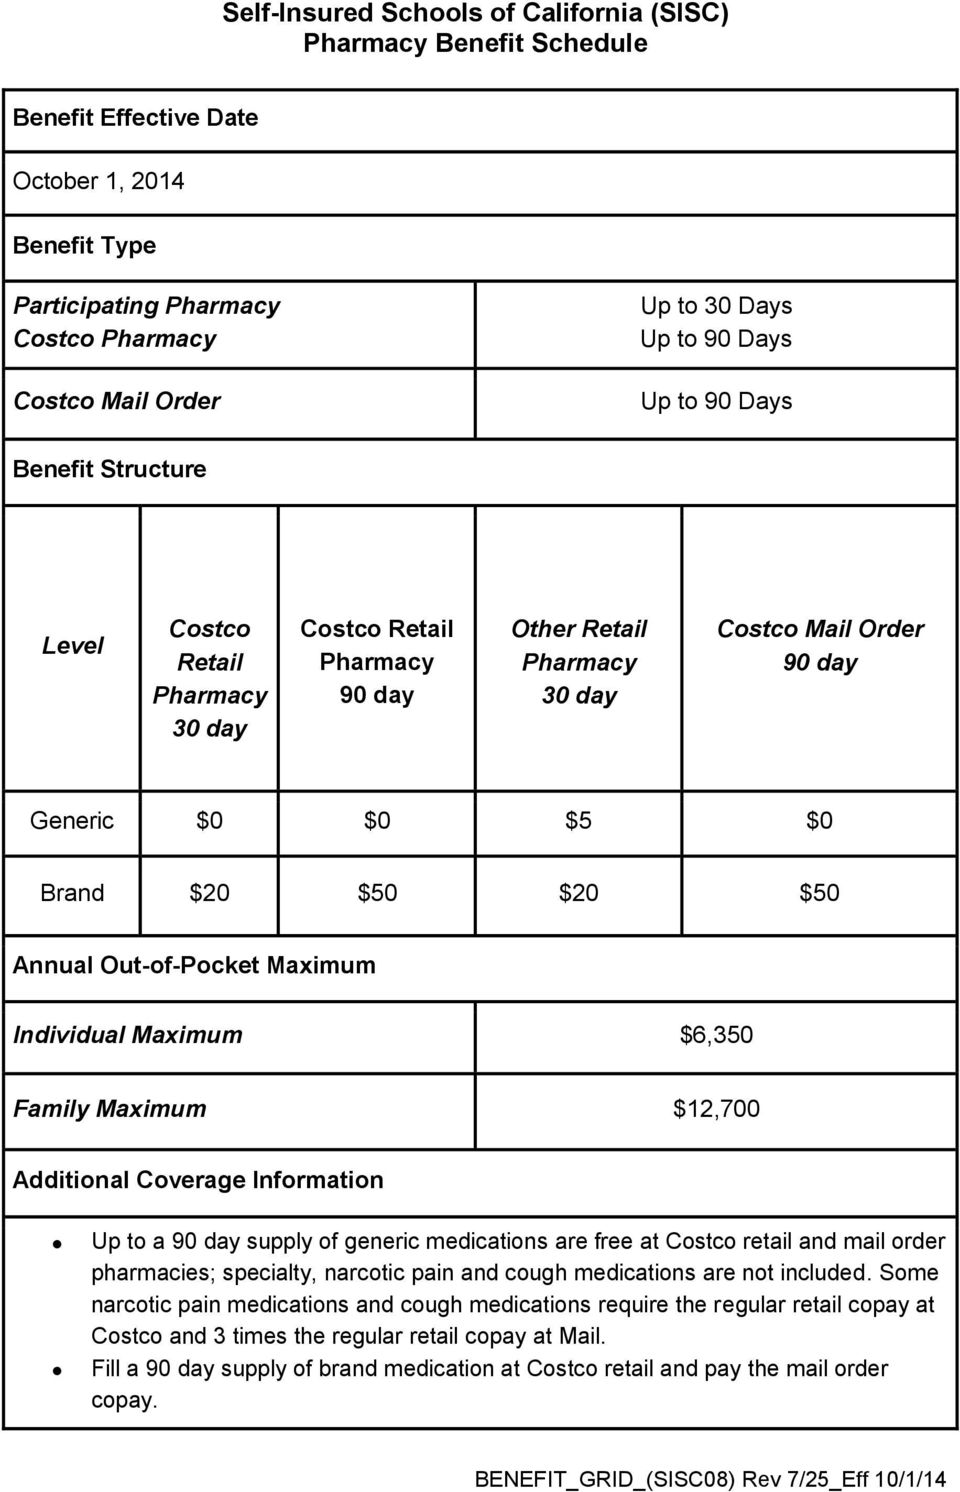 Annual Out-of-Pocket Maximum Individual Maximum $6,350 Family Maximum $12,700 Additional Coverage Information Up to a 90 day supply of generic medications are free at Costco retail and mail order